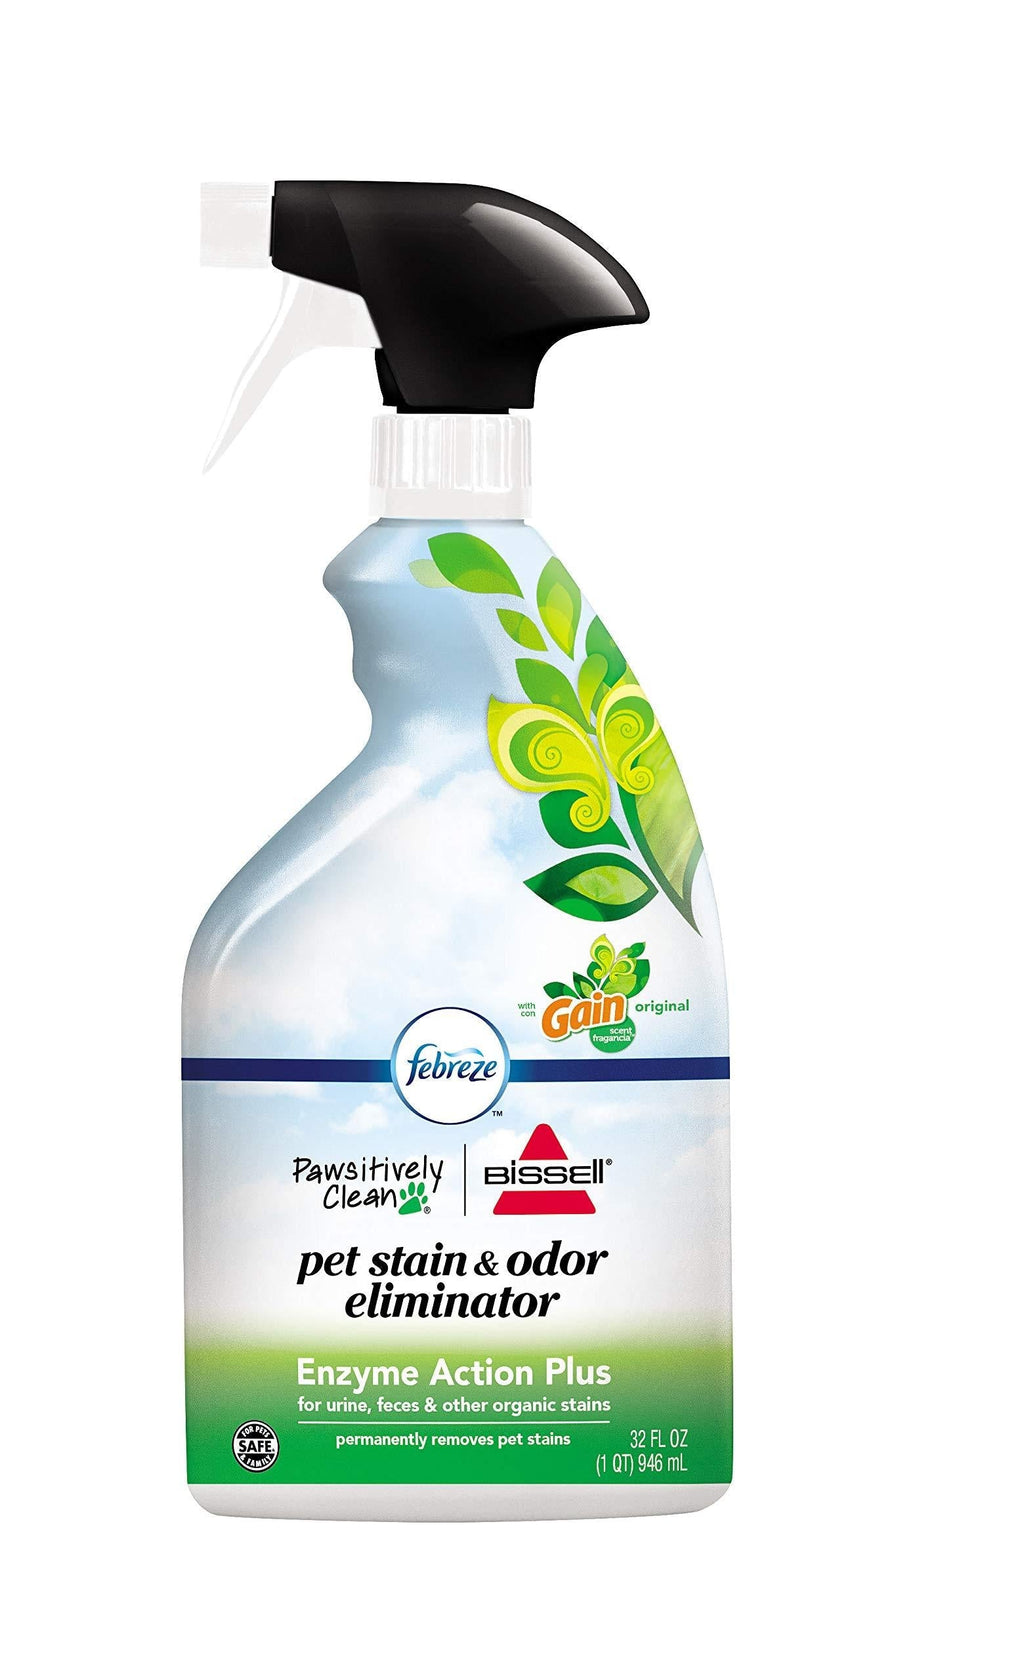 [Australia] - Bissell Pawsitively Clean with Gain & Febreze Pet Stain & Odor Eliminator 32 FZ 